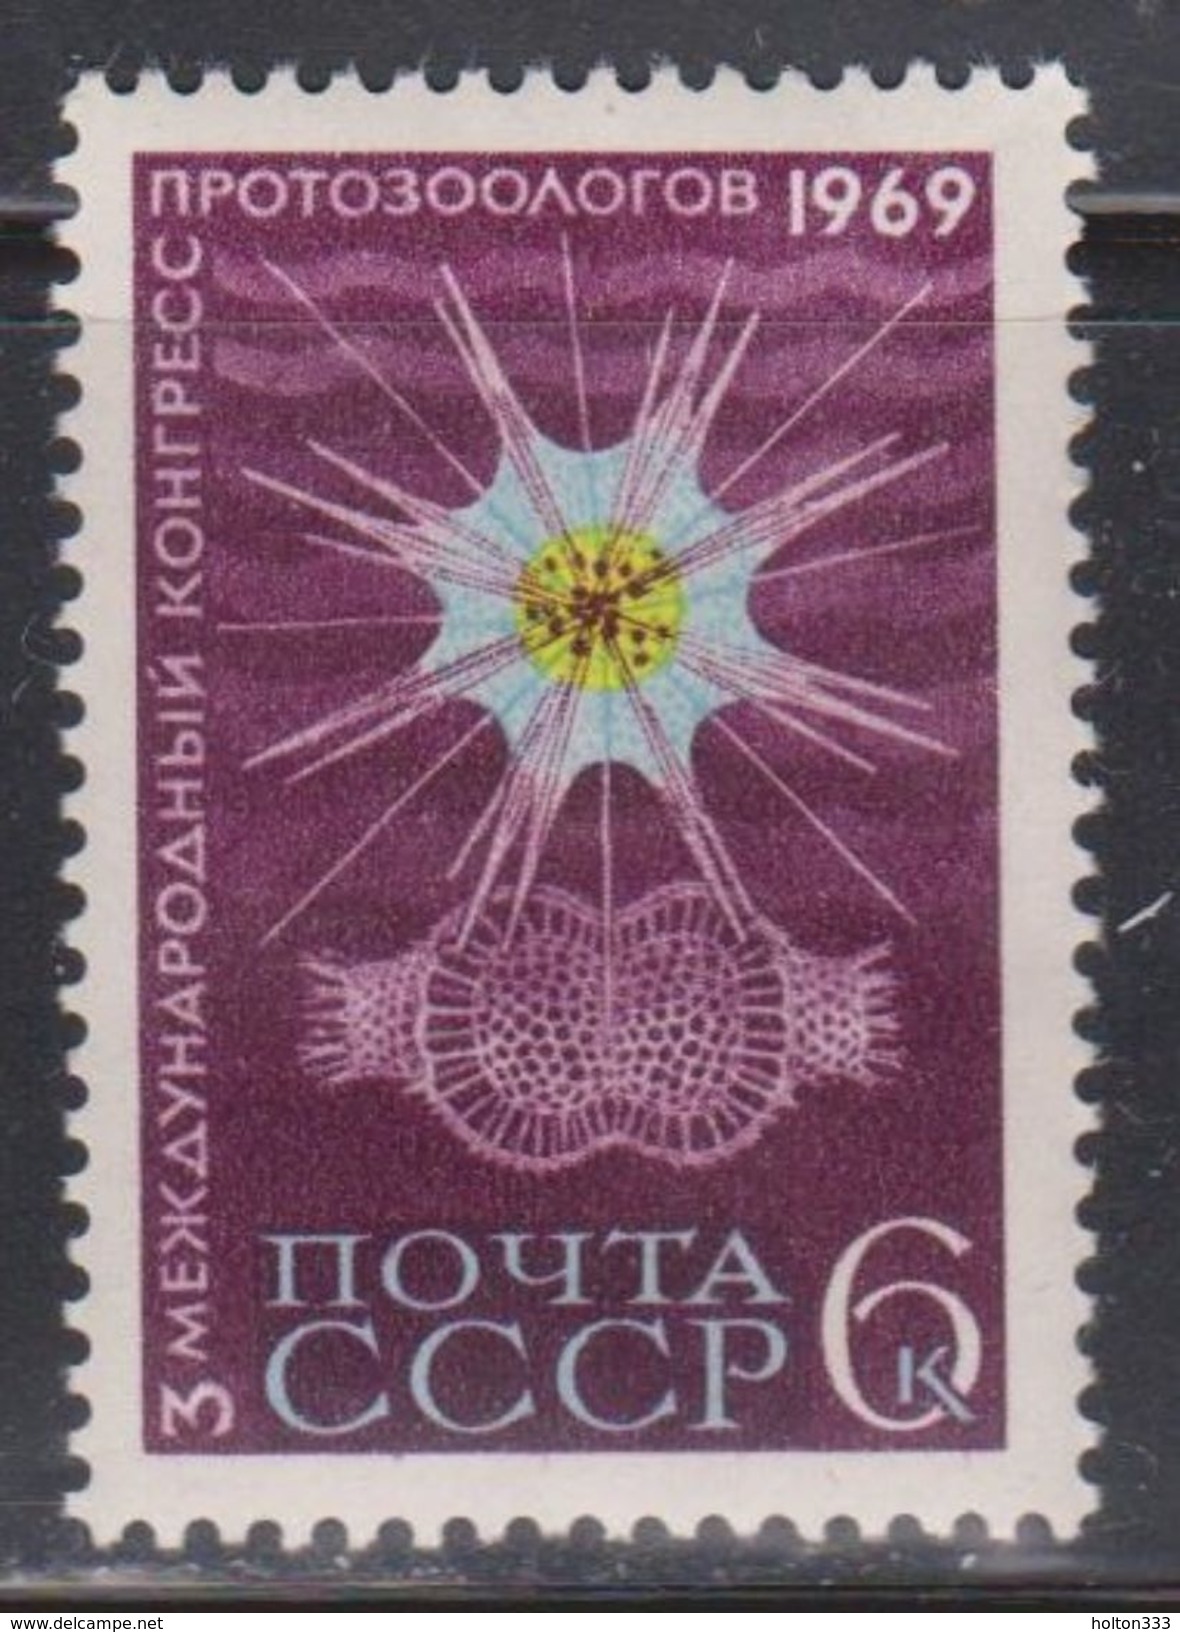 RUSSIA Scott # 3605 Mint Hinged - Protozoologists Conference - Eilsendung (Eilpost)